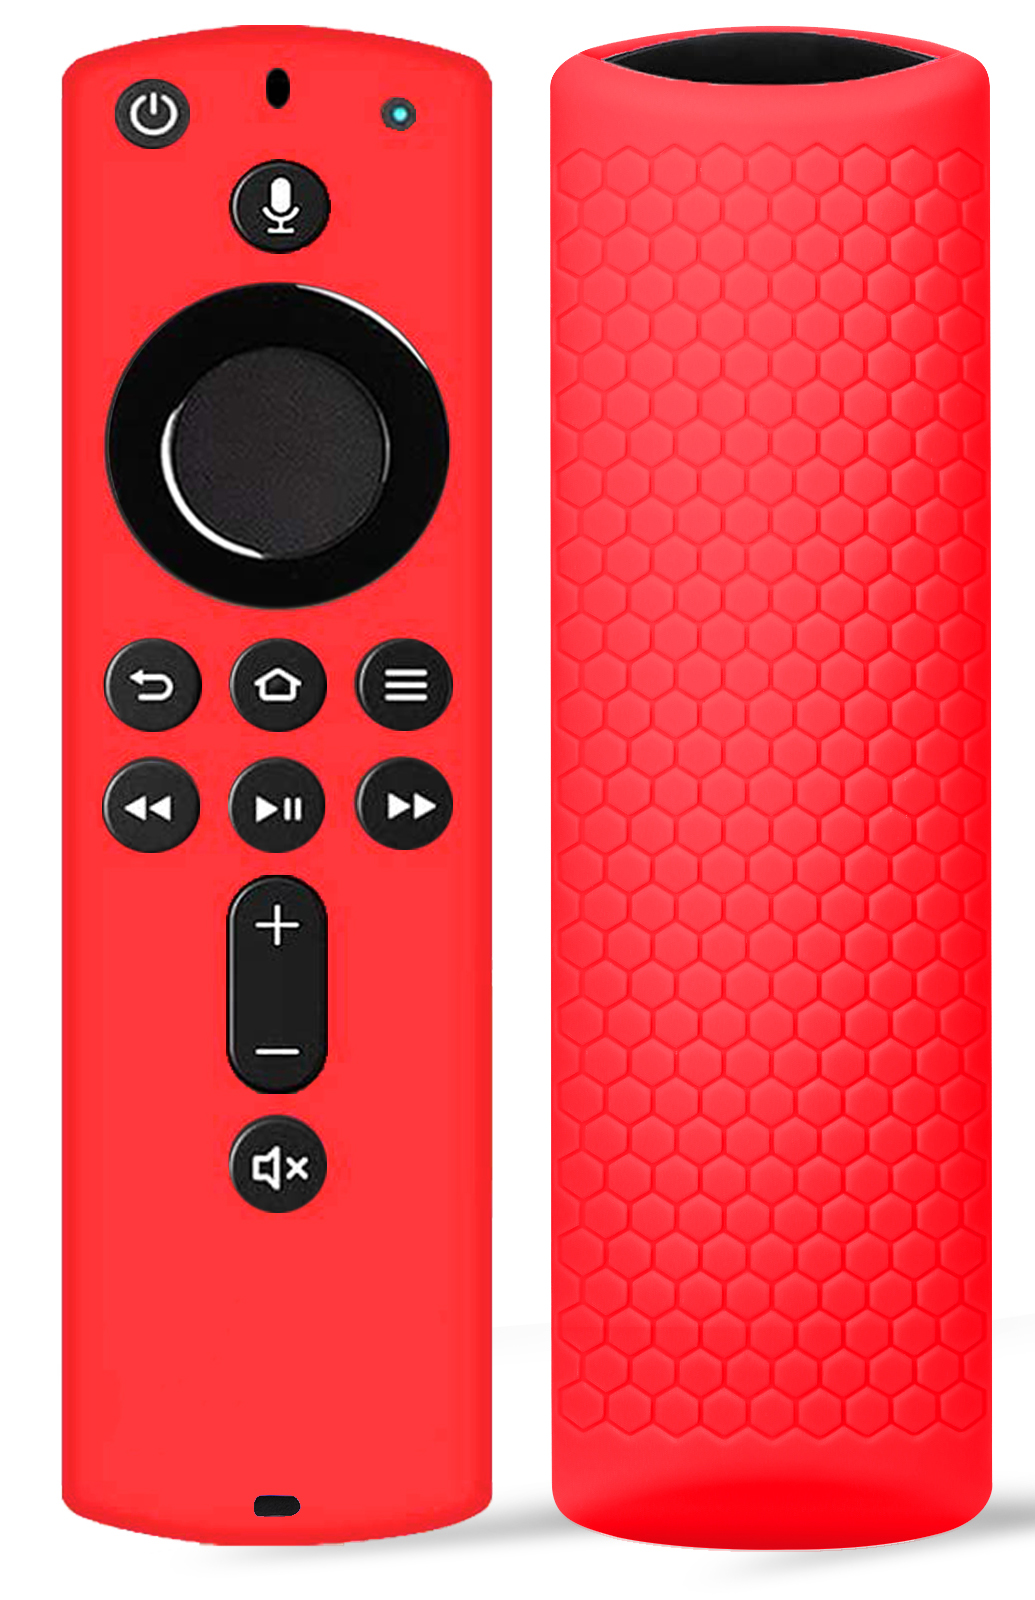 TOKERSE Remote Case Cover for Alexa Voice Remote for Amazon Fire TV Stick 2020/ Fire TV Stick 4K/ Fire TV Cube/Fire TV (3rd Gen) - Silicone Cover Case Compatible with All-New 2nd Gen Remote Control - Red